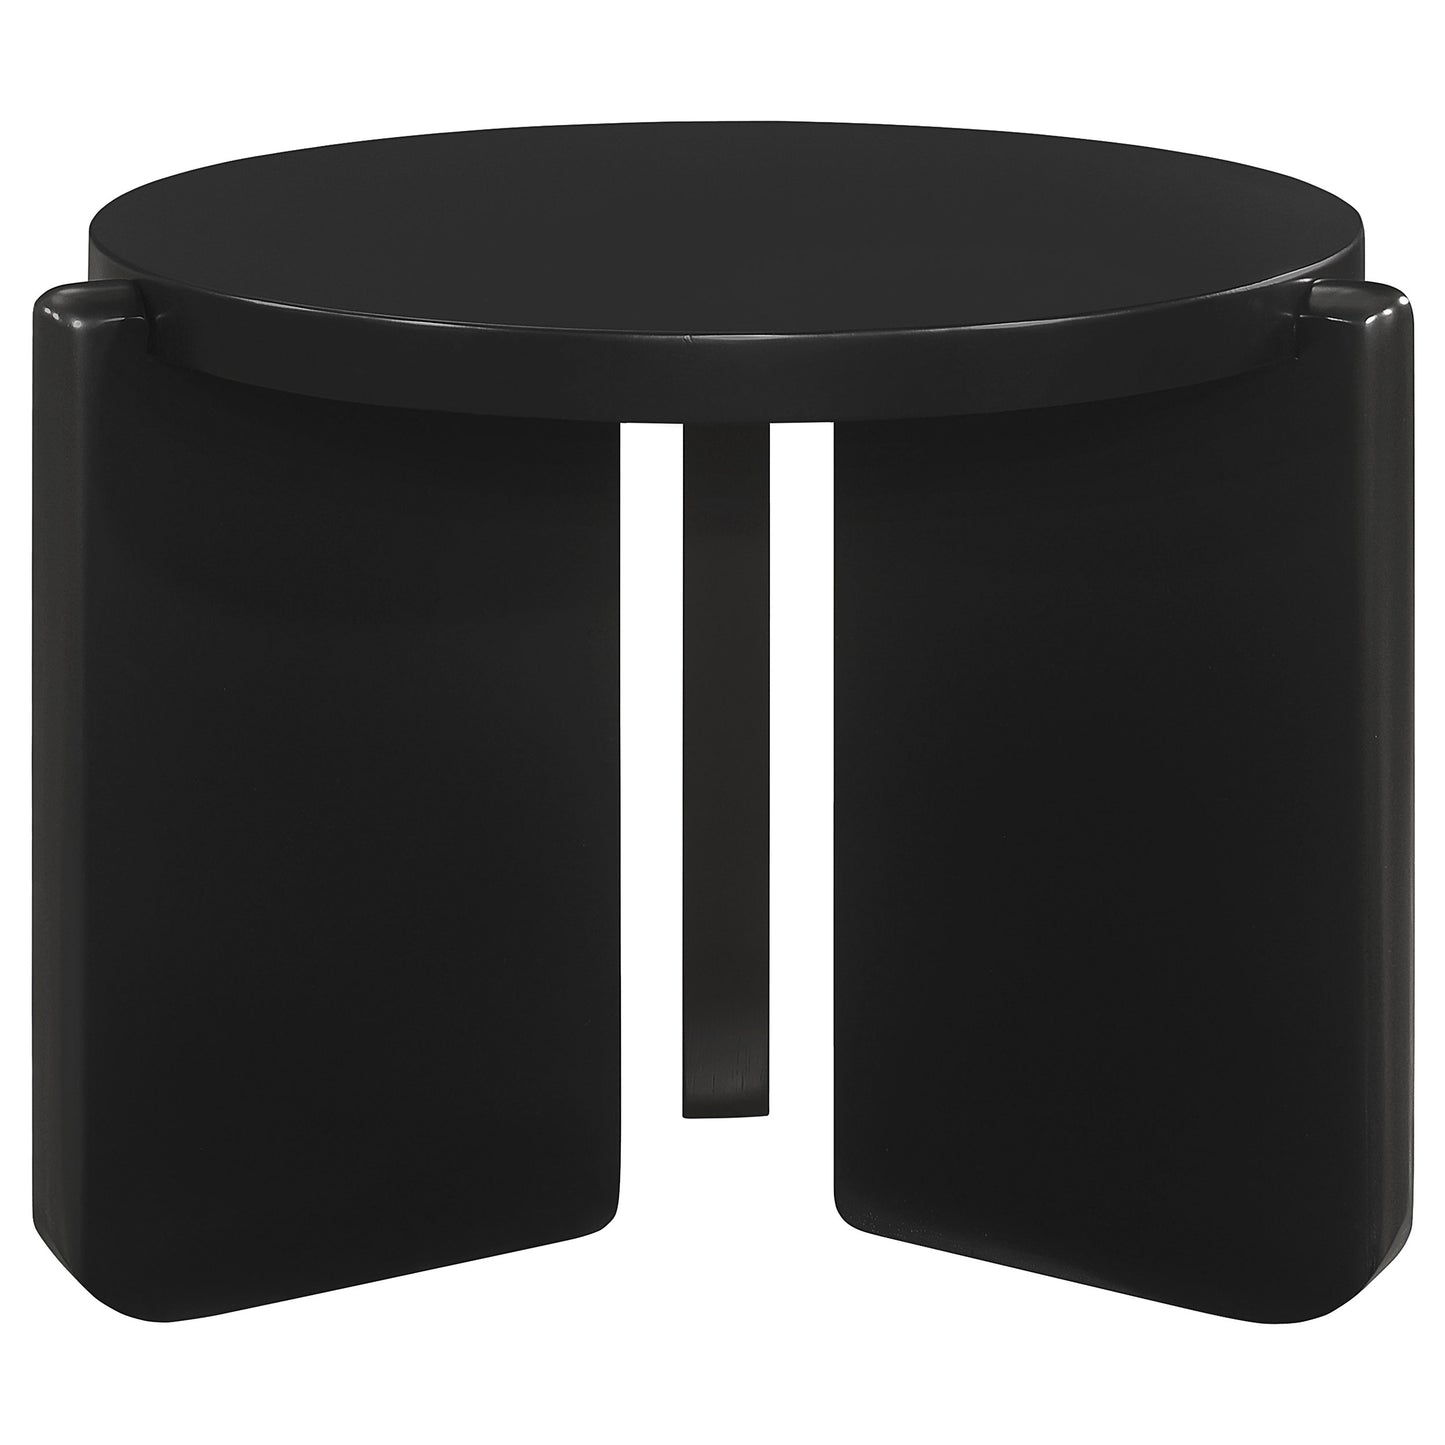 Cordova Round Solid Wood End Table Black